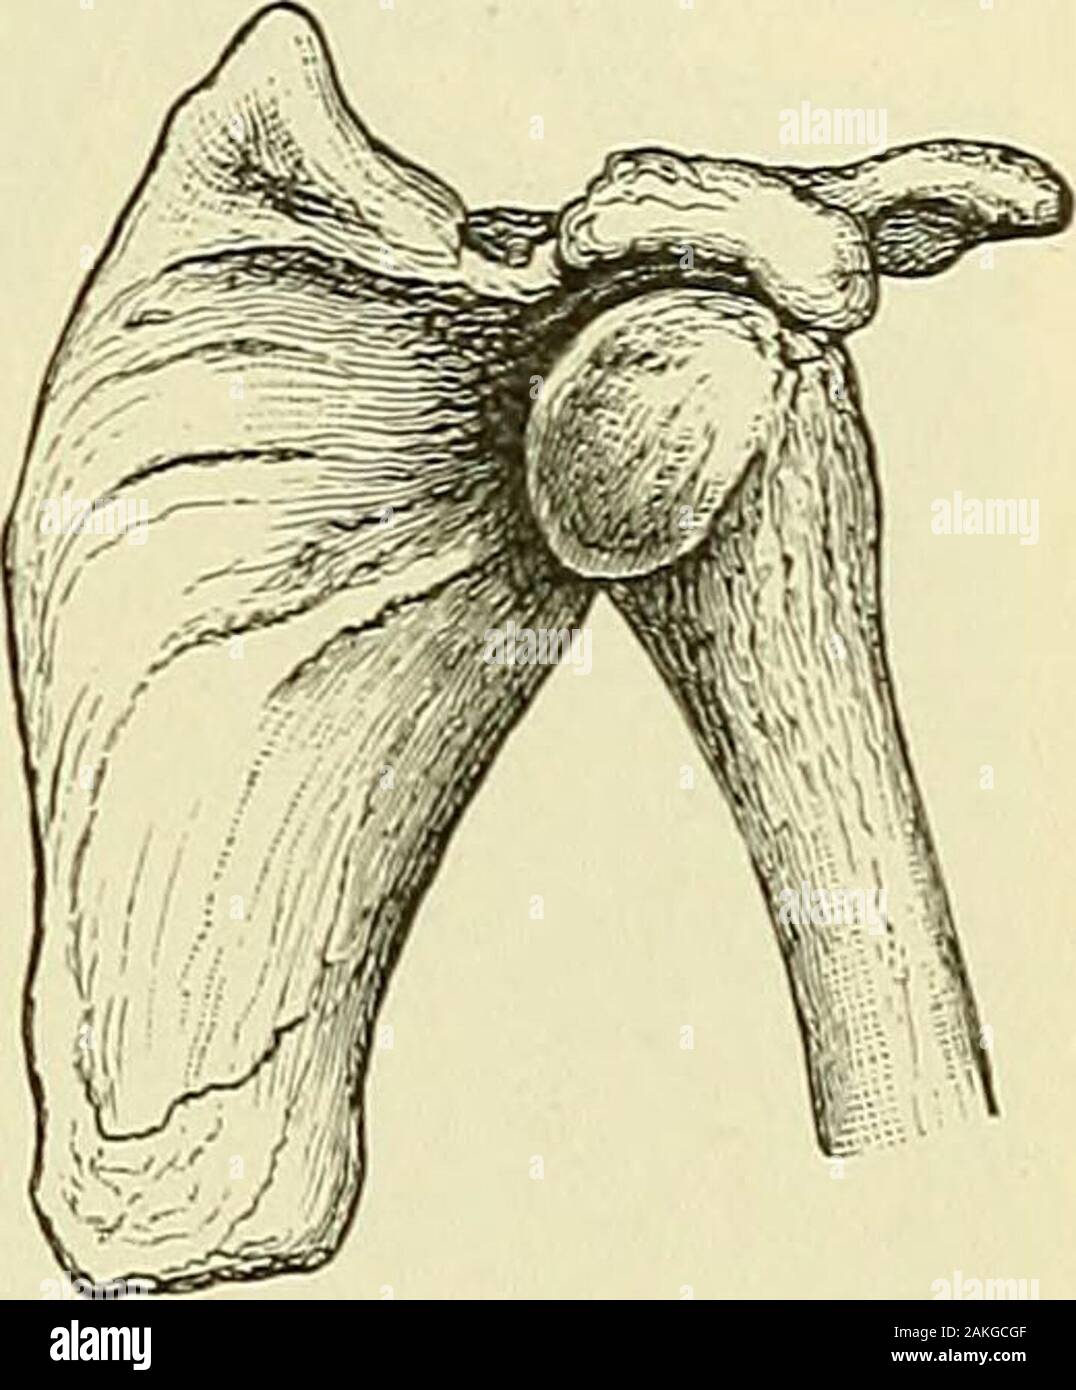 A manual of modern surgery : an exposition of the accepted doctrines and approved operative procedures of the present time, for the use of students and practitioners . on of this bone themost common of dislocations. A7iolent muscular contraction of epi-leptic and similar convulsions may cause the lesion. The capsuleusually tears at its lower part, which is the weakest. The head of thehumerus usually goes either forward or backward. Its final locationdepends upon the nature and direction of the force, and upon secondarymovements of the bone. Occasionally the head is displaced directlydownwards, Stock Photo